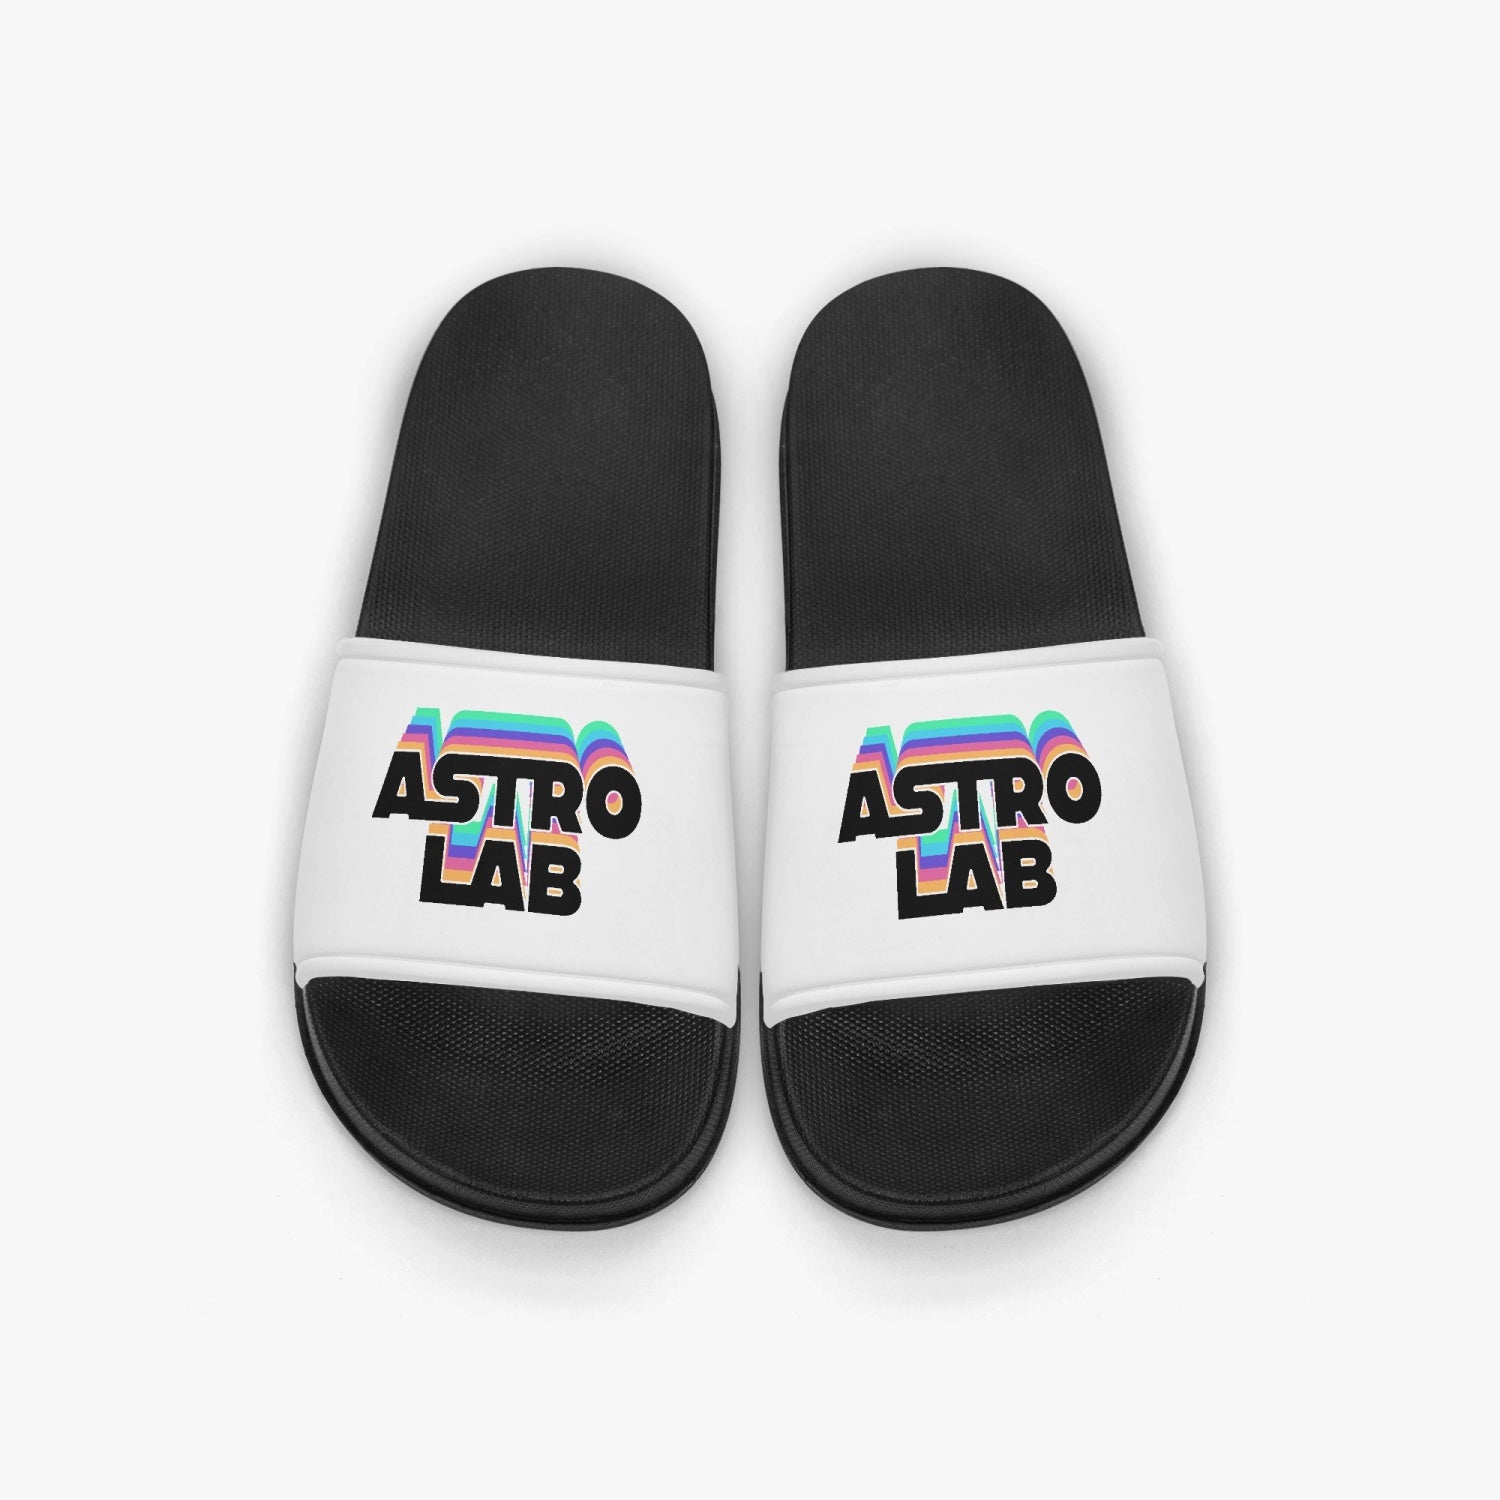 651. Astro-Lab-Home Slippers - Black